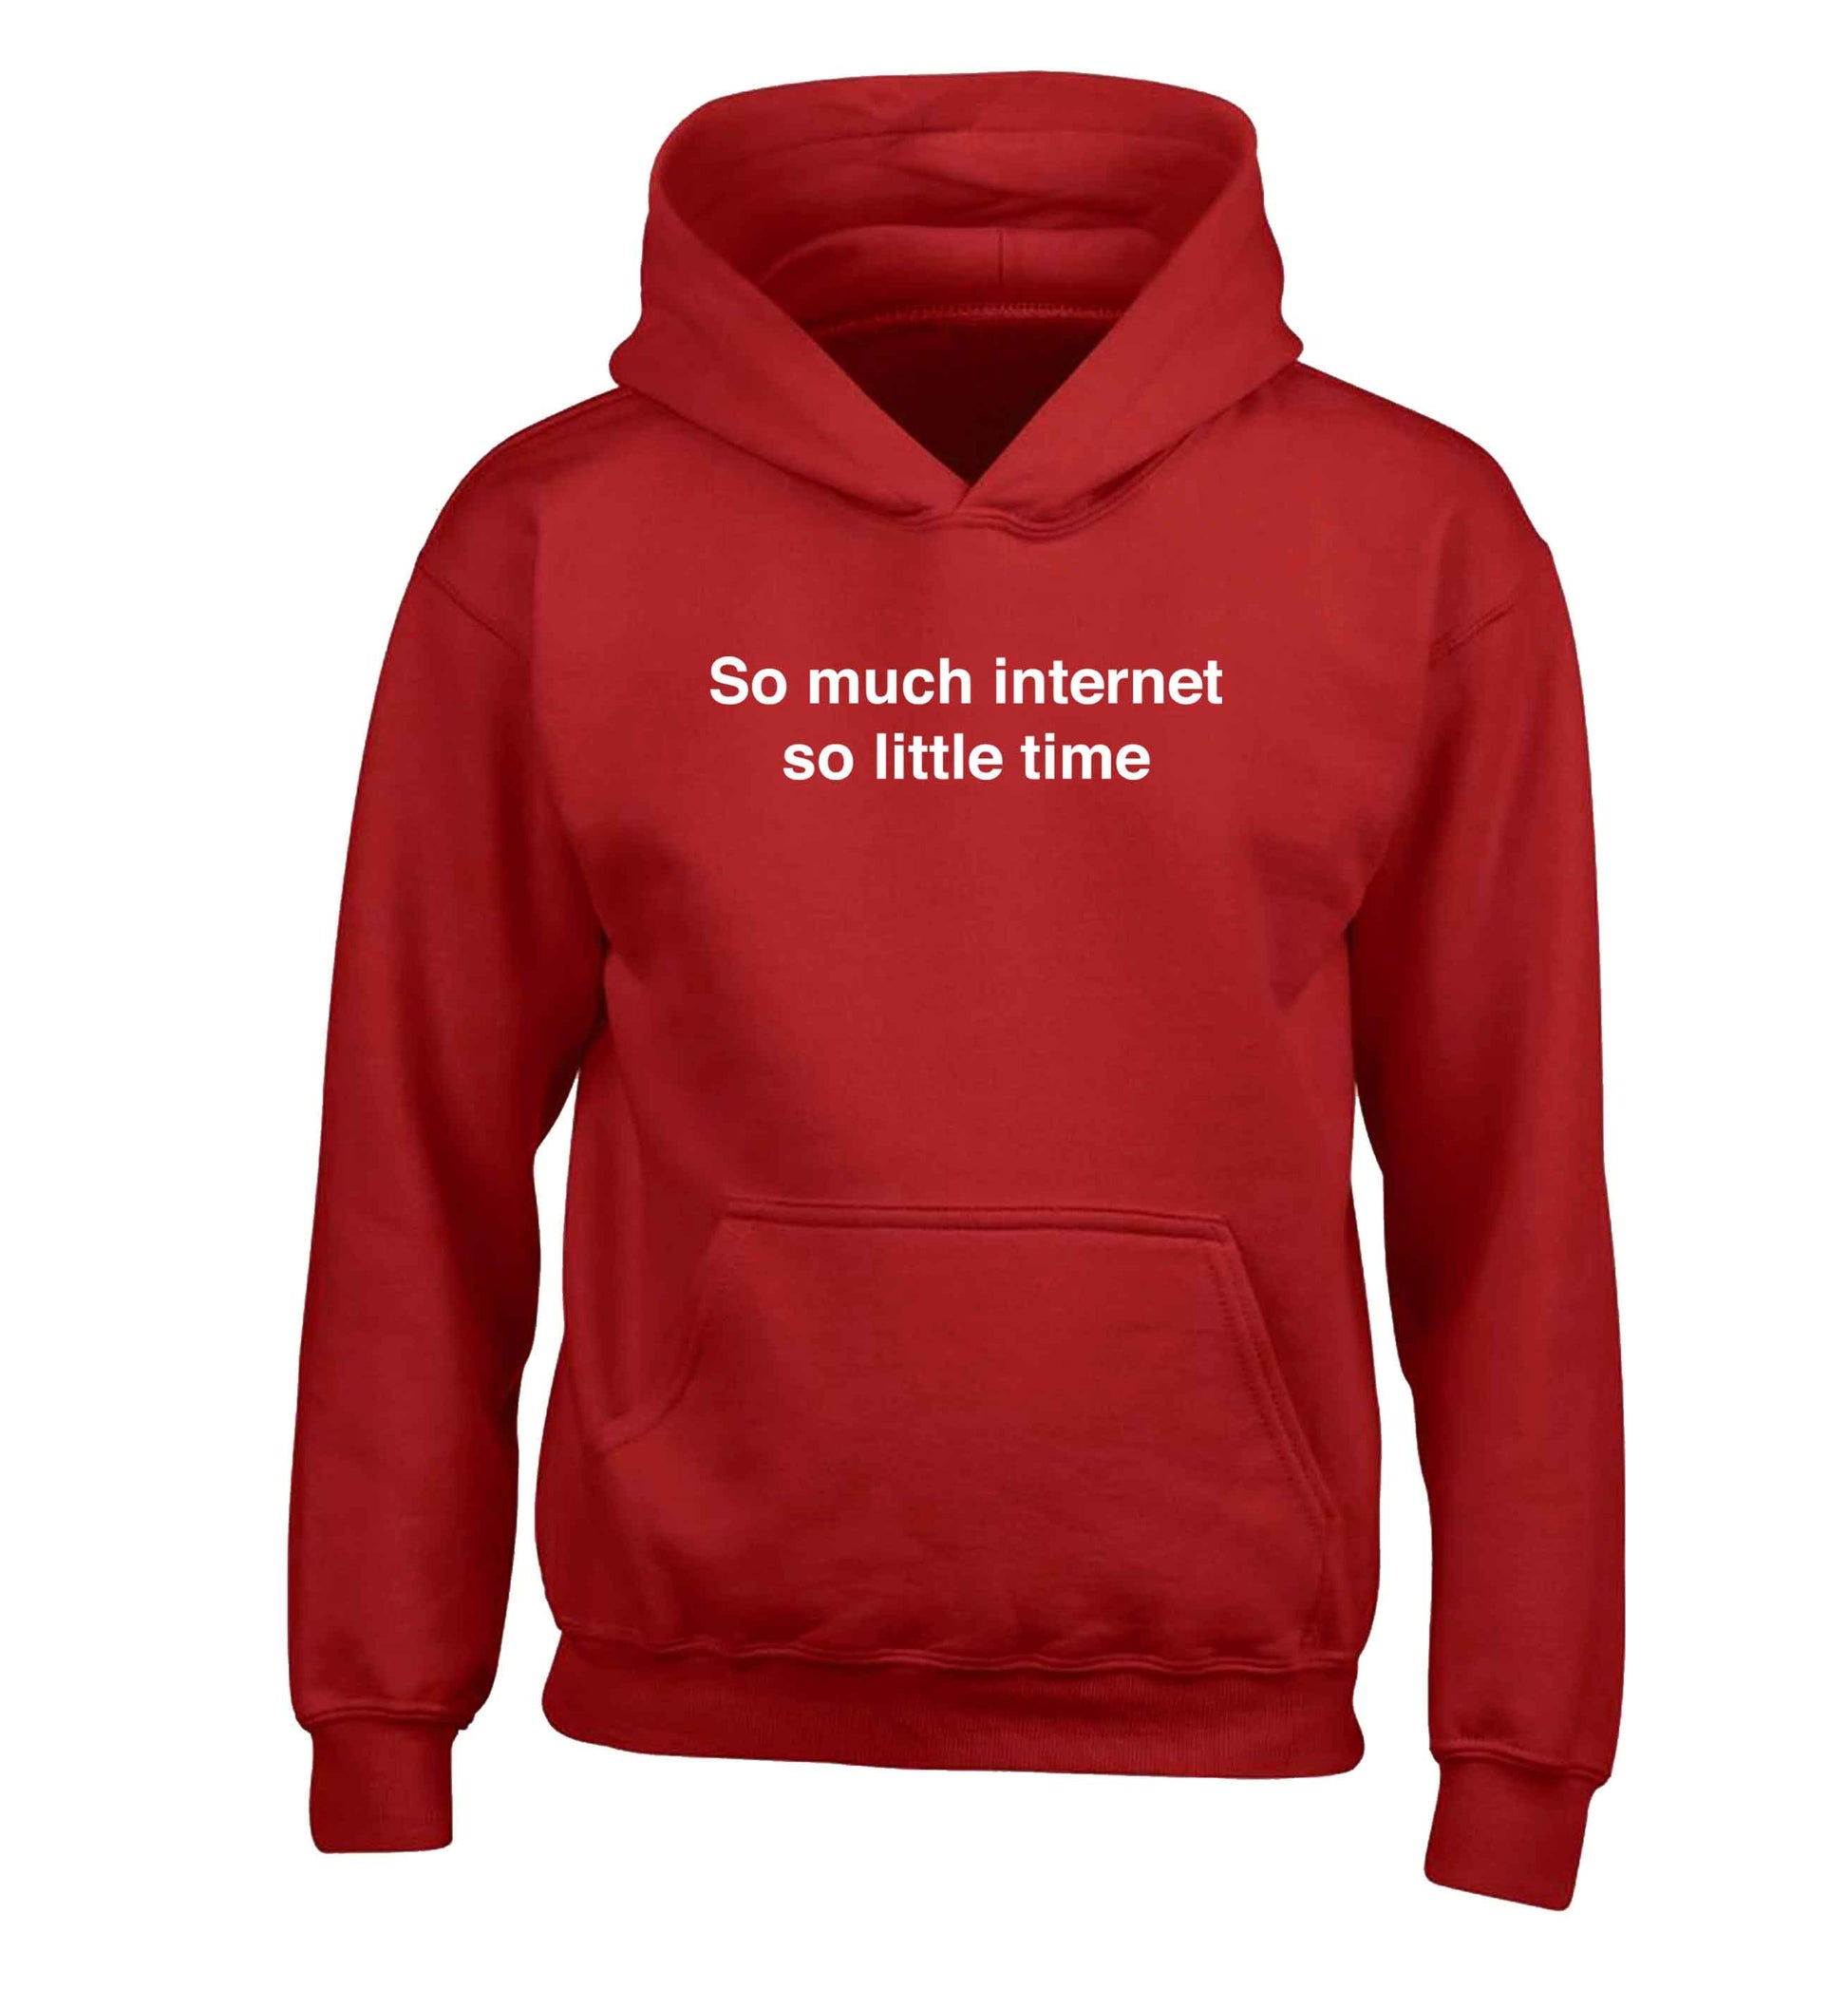 So much internet so little time children's red hoodie 12-13 Years